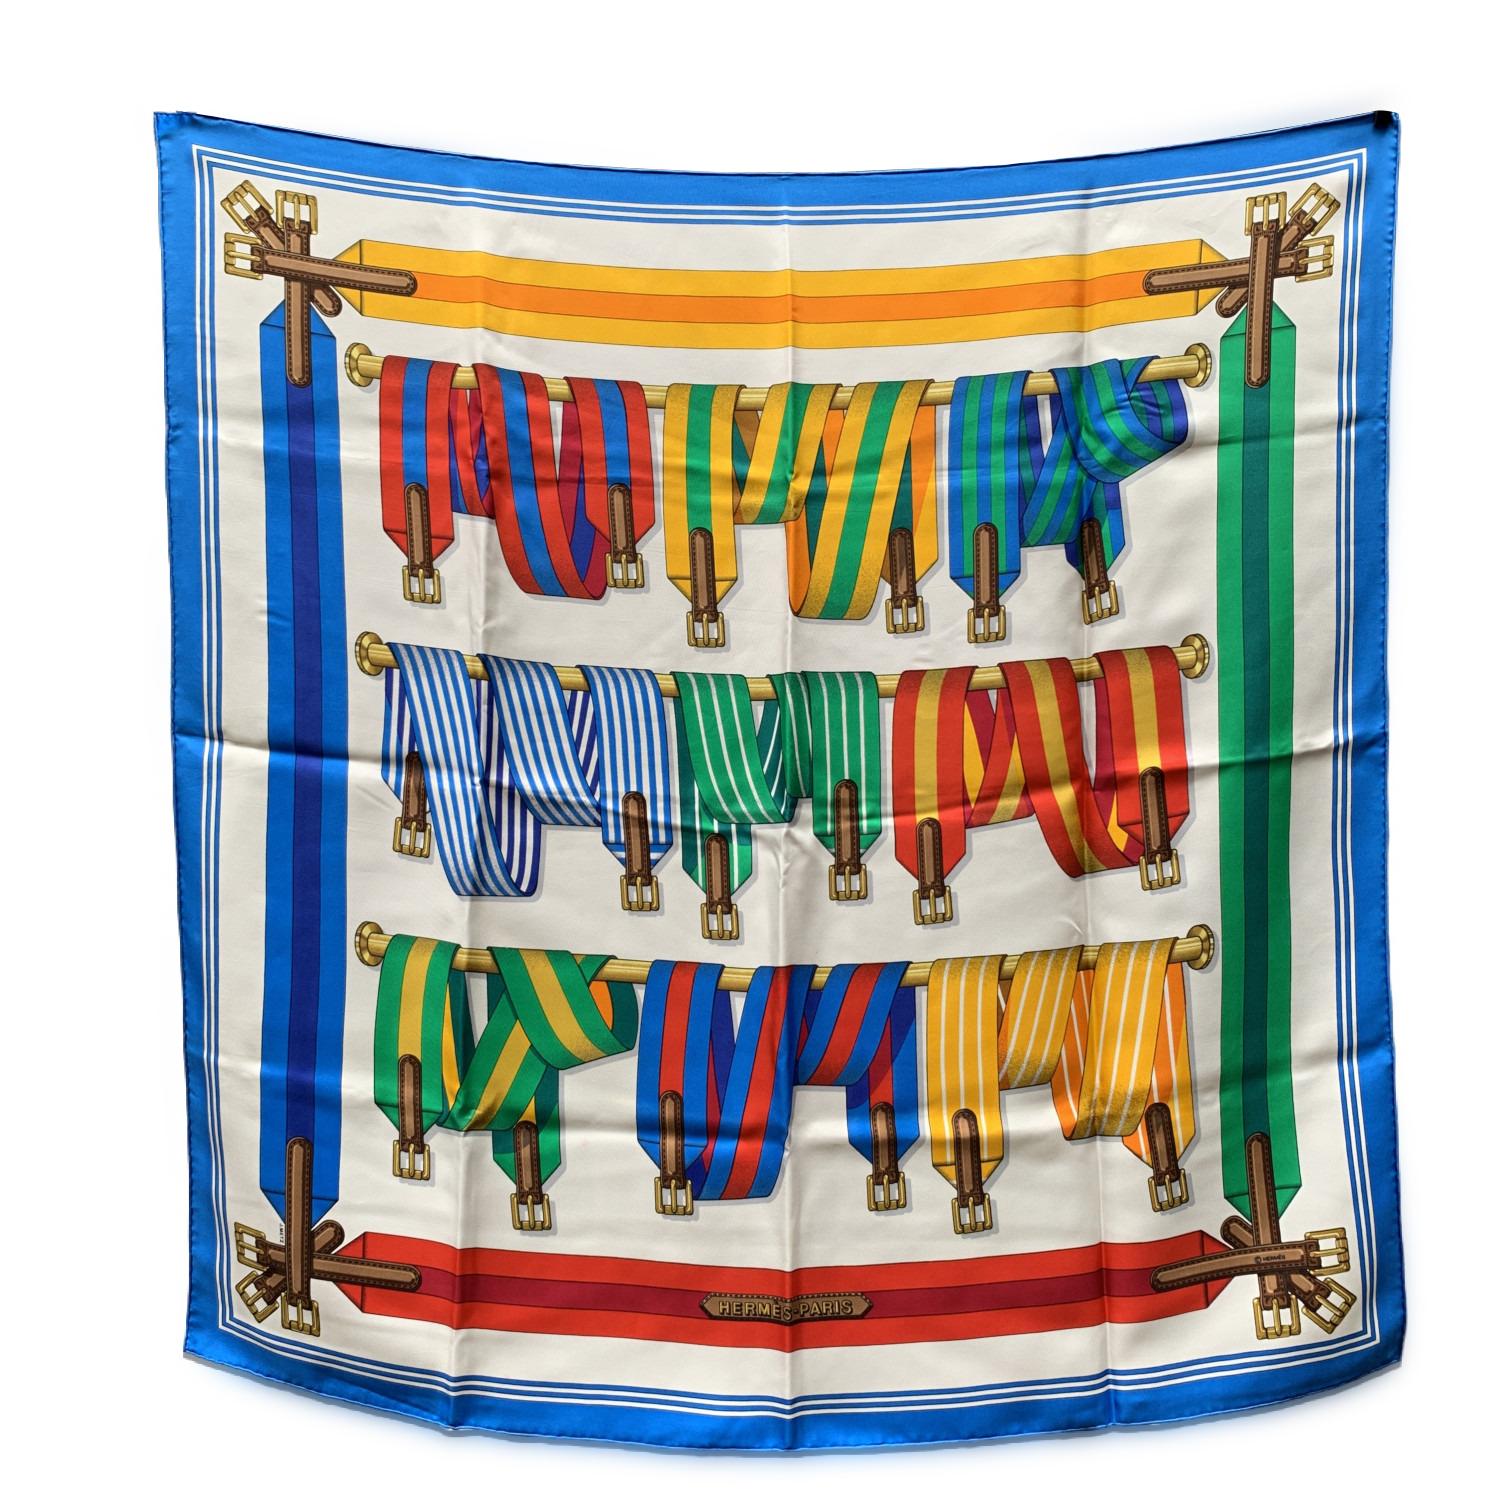 Vintage HERMES scarf 'Les Sangles' (Belts) was designed by Joaquim Metz and first issued in 1985. Multicolor striped belt and buckle pattern with blue borders. The 'HERMES Paris' signature in the lower center border. 100% silk. Approx measurements: